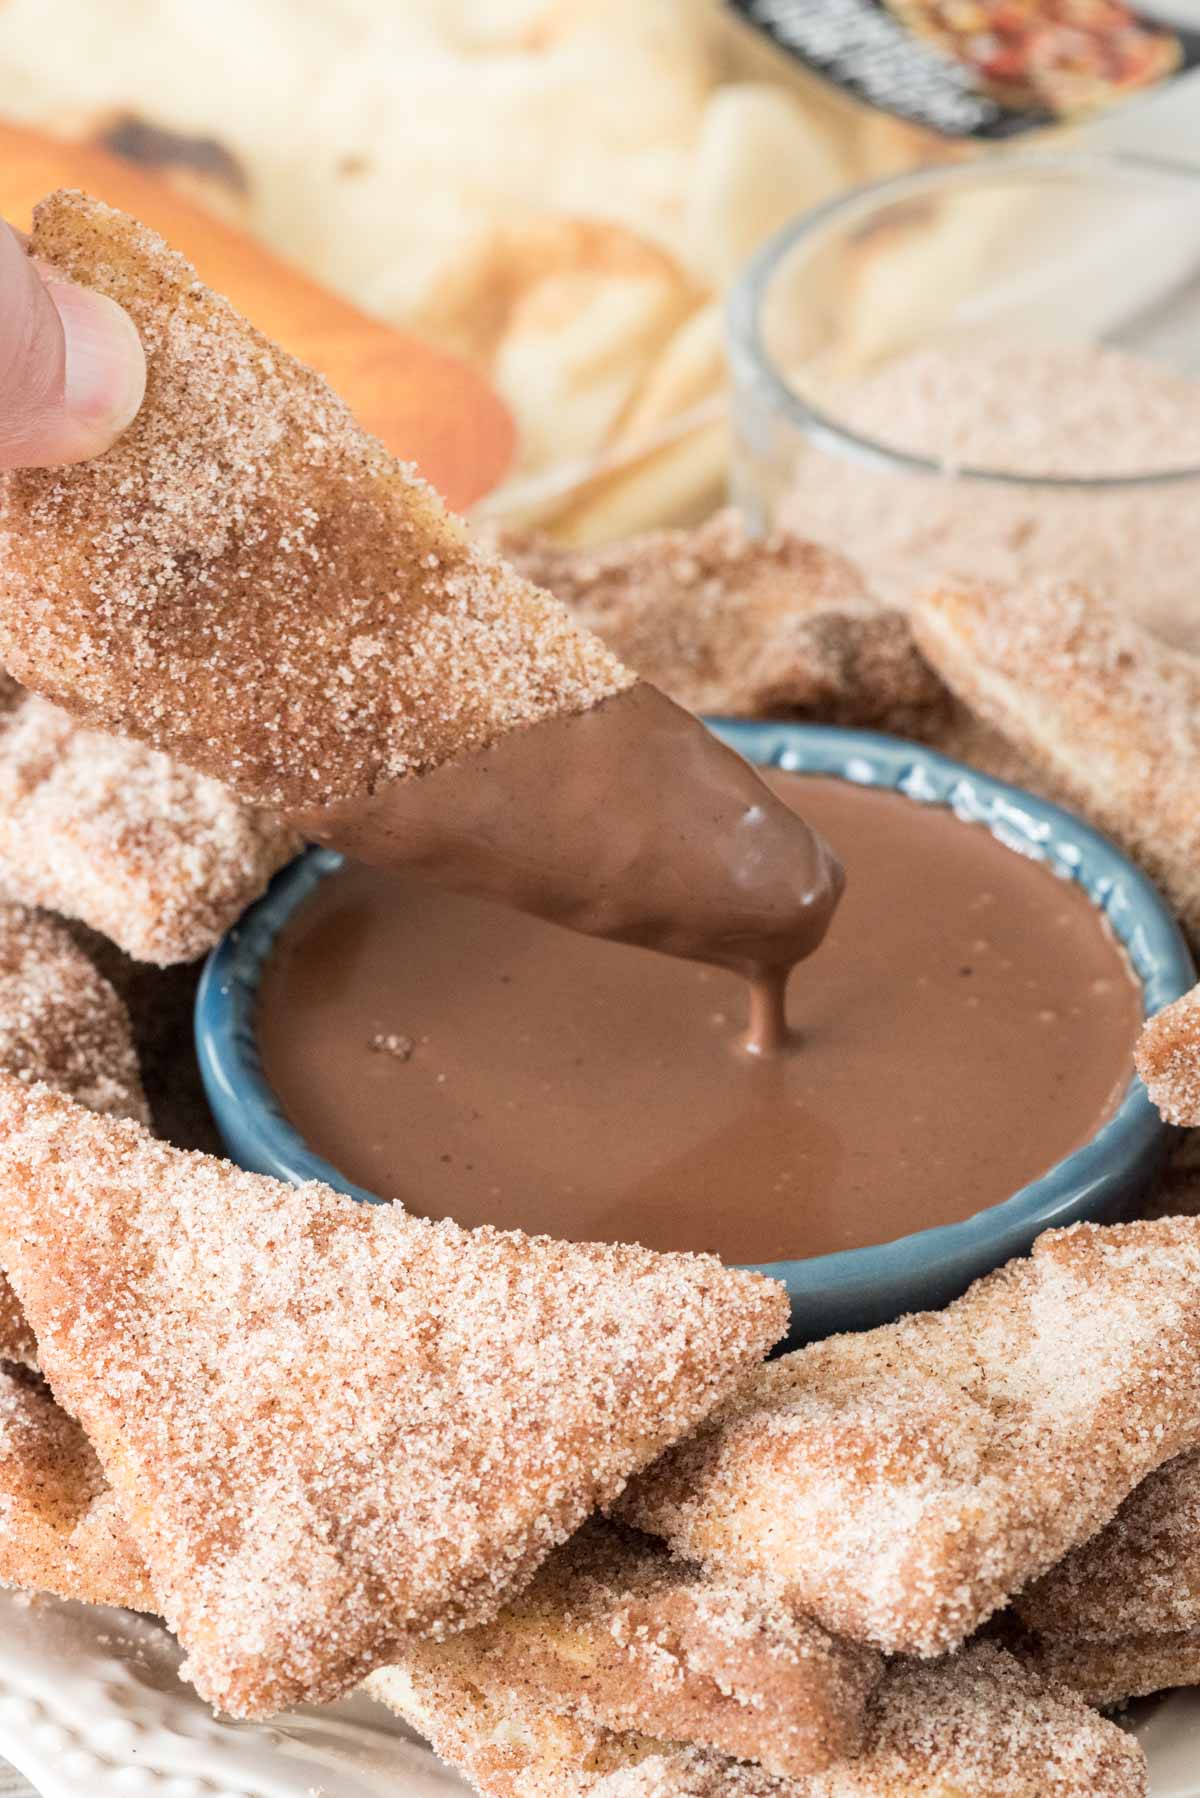 Baked Churro Chips with chocolate ganache dip - this EASY recipe starts with naan and becomes a crunchy churro chip, best dipped in rich chocolate ganache dip!